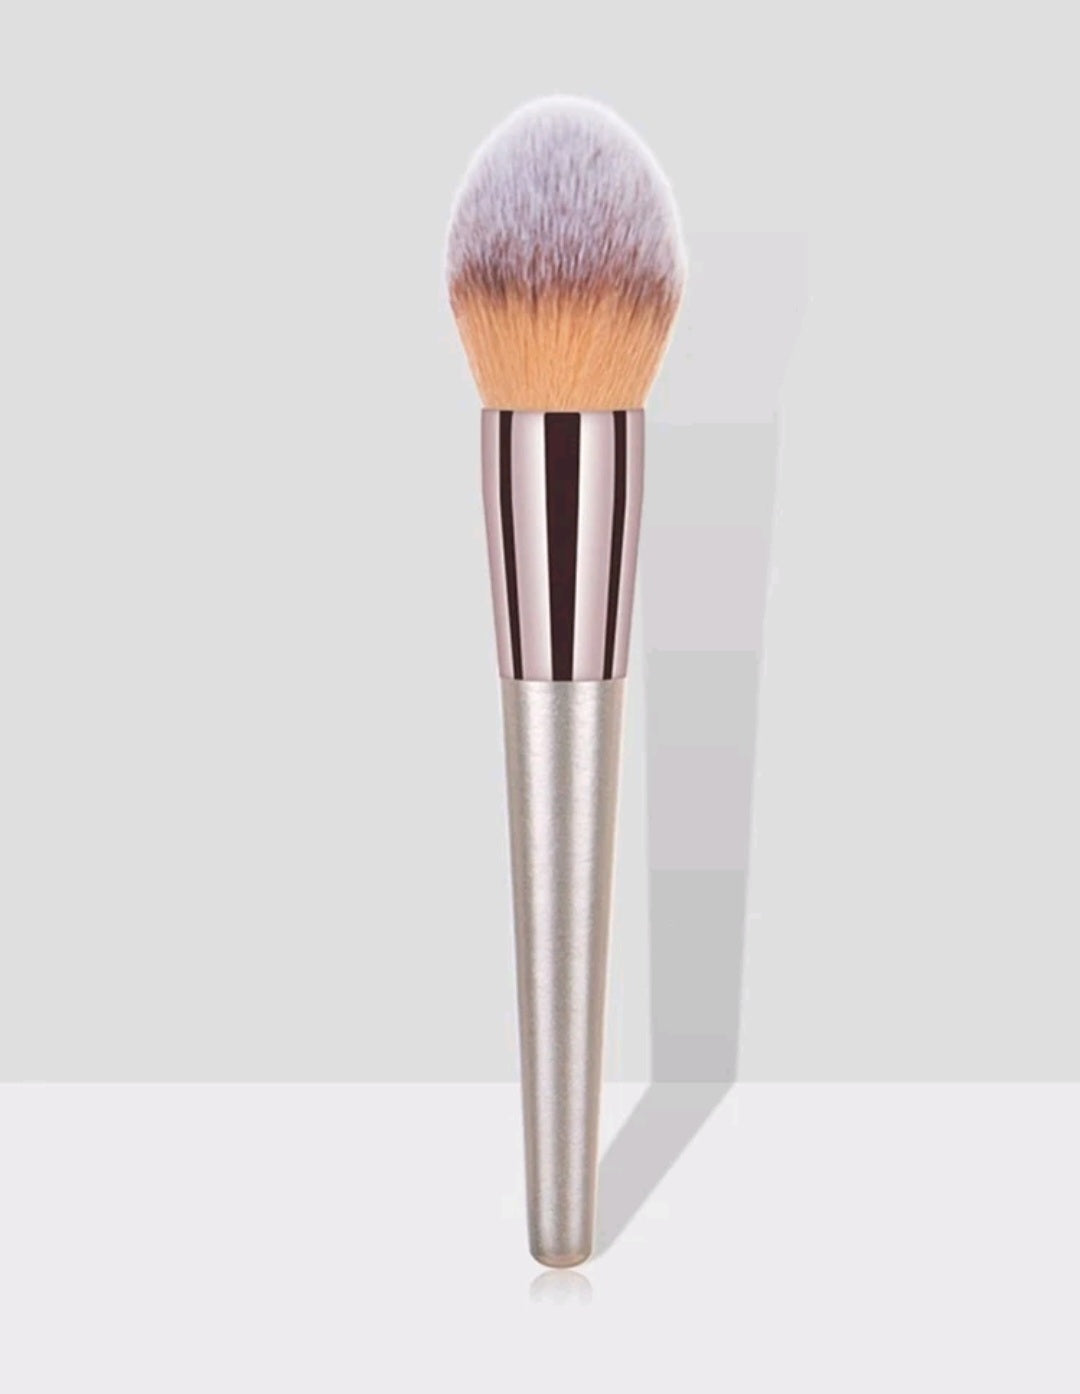 1pc Champagne color Highlighter/Blush Makeup Brush for Women~Pennello trucco per illuminante/blush - SANDY'S MAKEUP AND ARTISTRY 